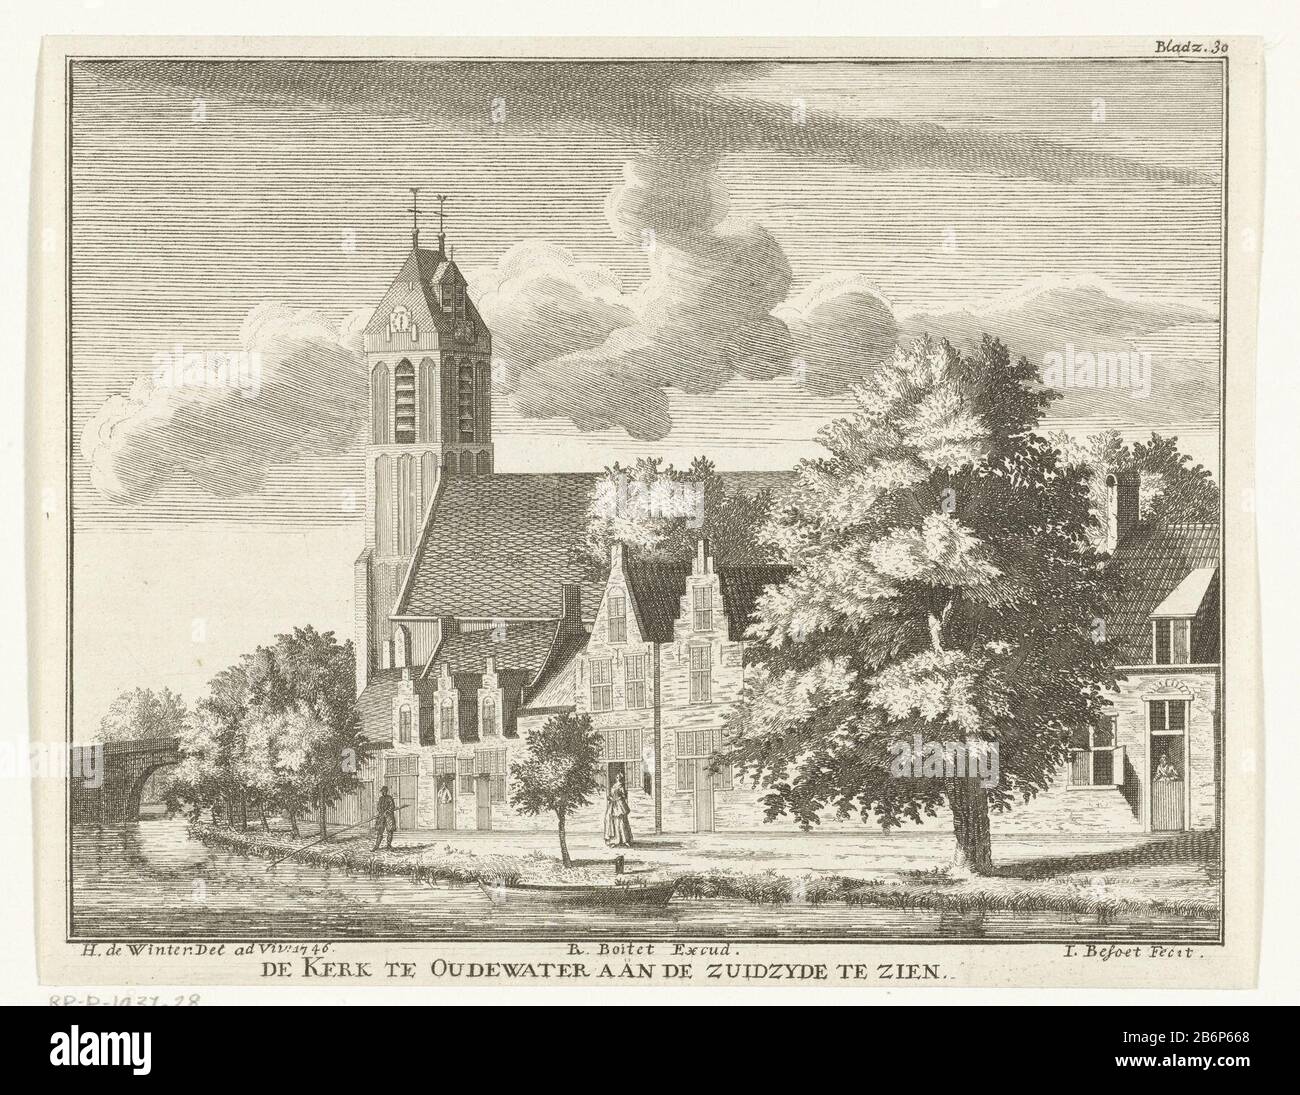 View of Grote of St. Michael Church OudewaterDe Church Oudewater to see the zuidzyde (title object) Object type: picture book illustration Item number: RP-P-1937-28 Inscriptions / Brands: collector's mark, verso left, stamped : Lugt 2760 collector's mark , verso bottom center, stamped: Lugt 2228 Manufacturer : printmaker: Iven Besoet (listed property) to drawing: Henry Winter (listed building) publisher: Reinier Boitet (listed property) Place manufacture: printmaker: Netherlands Publisher: Delft Date: 1746 - 1747 and / or 1747 Physical characteristics: etching and engra material: paper Techniq Stock Photo